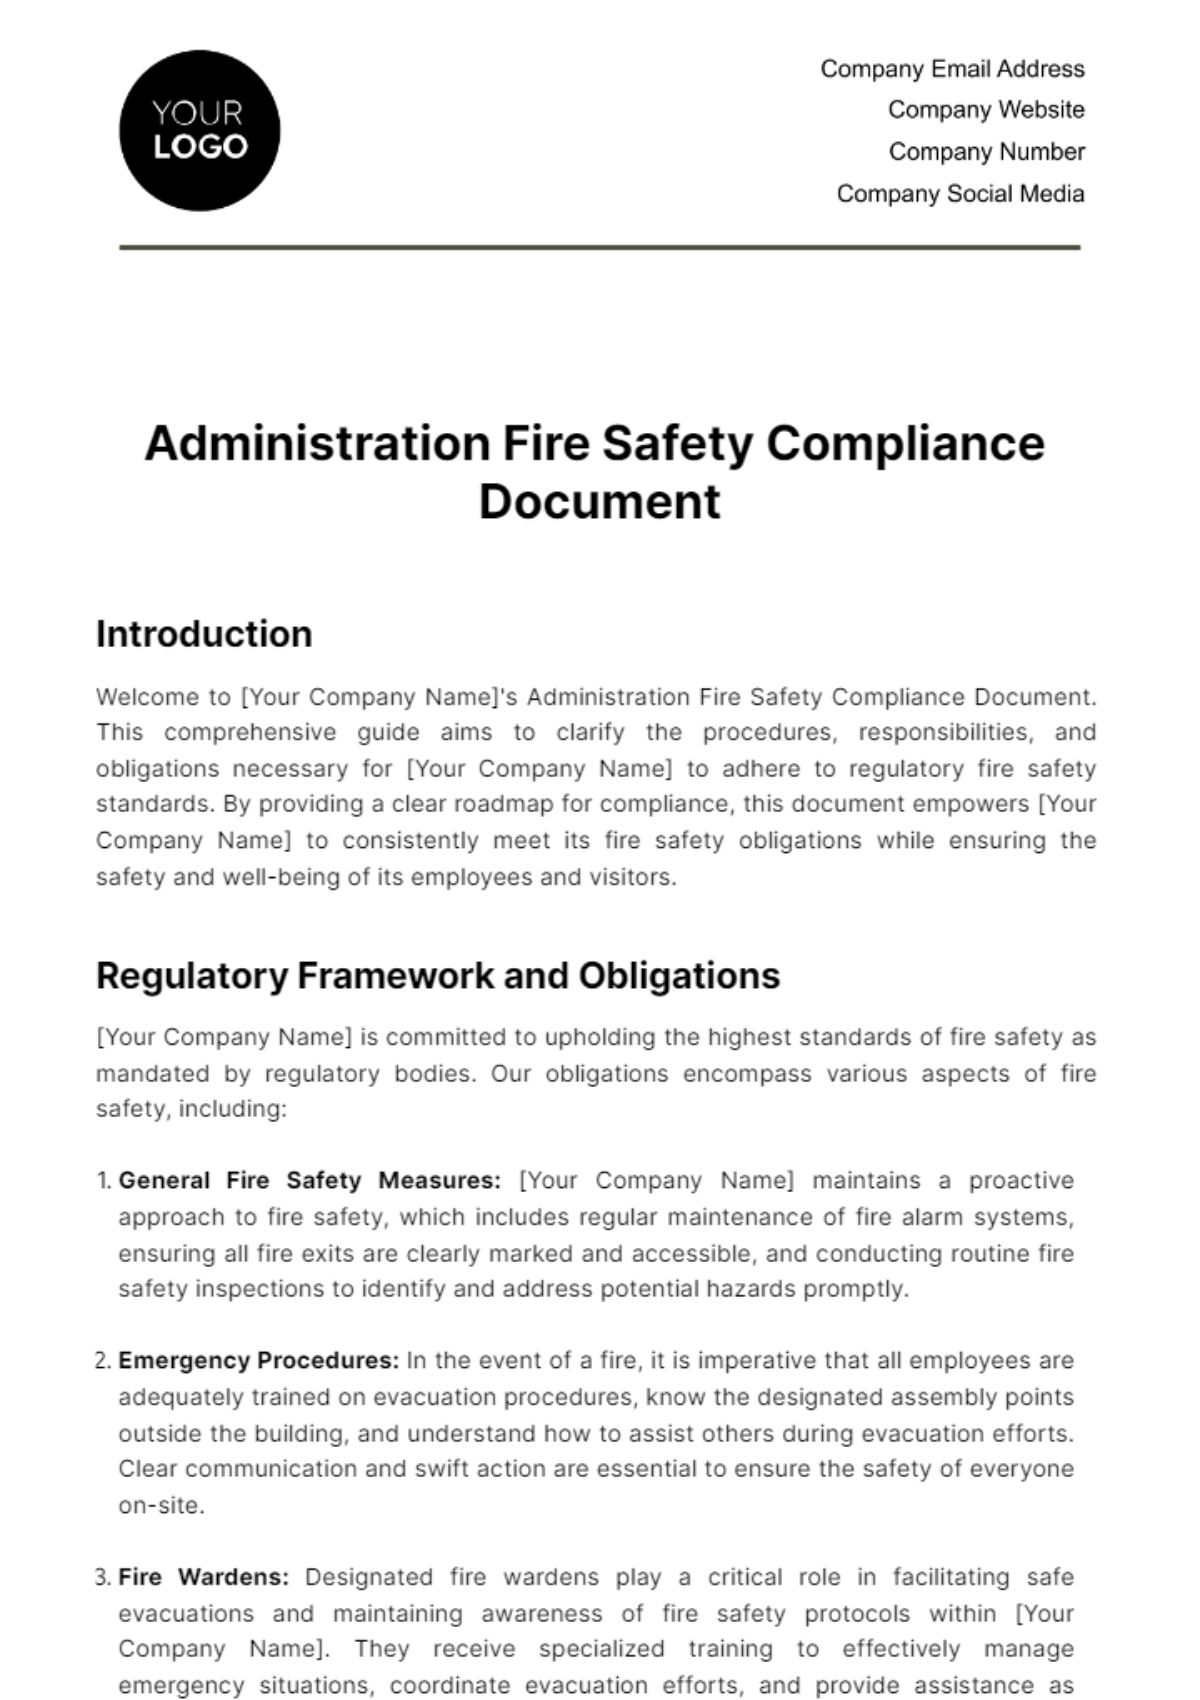 Administration Fire Safety Compliance Document Template